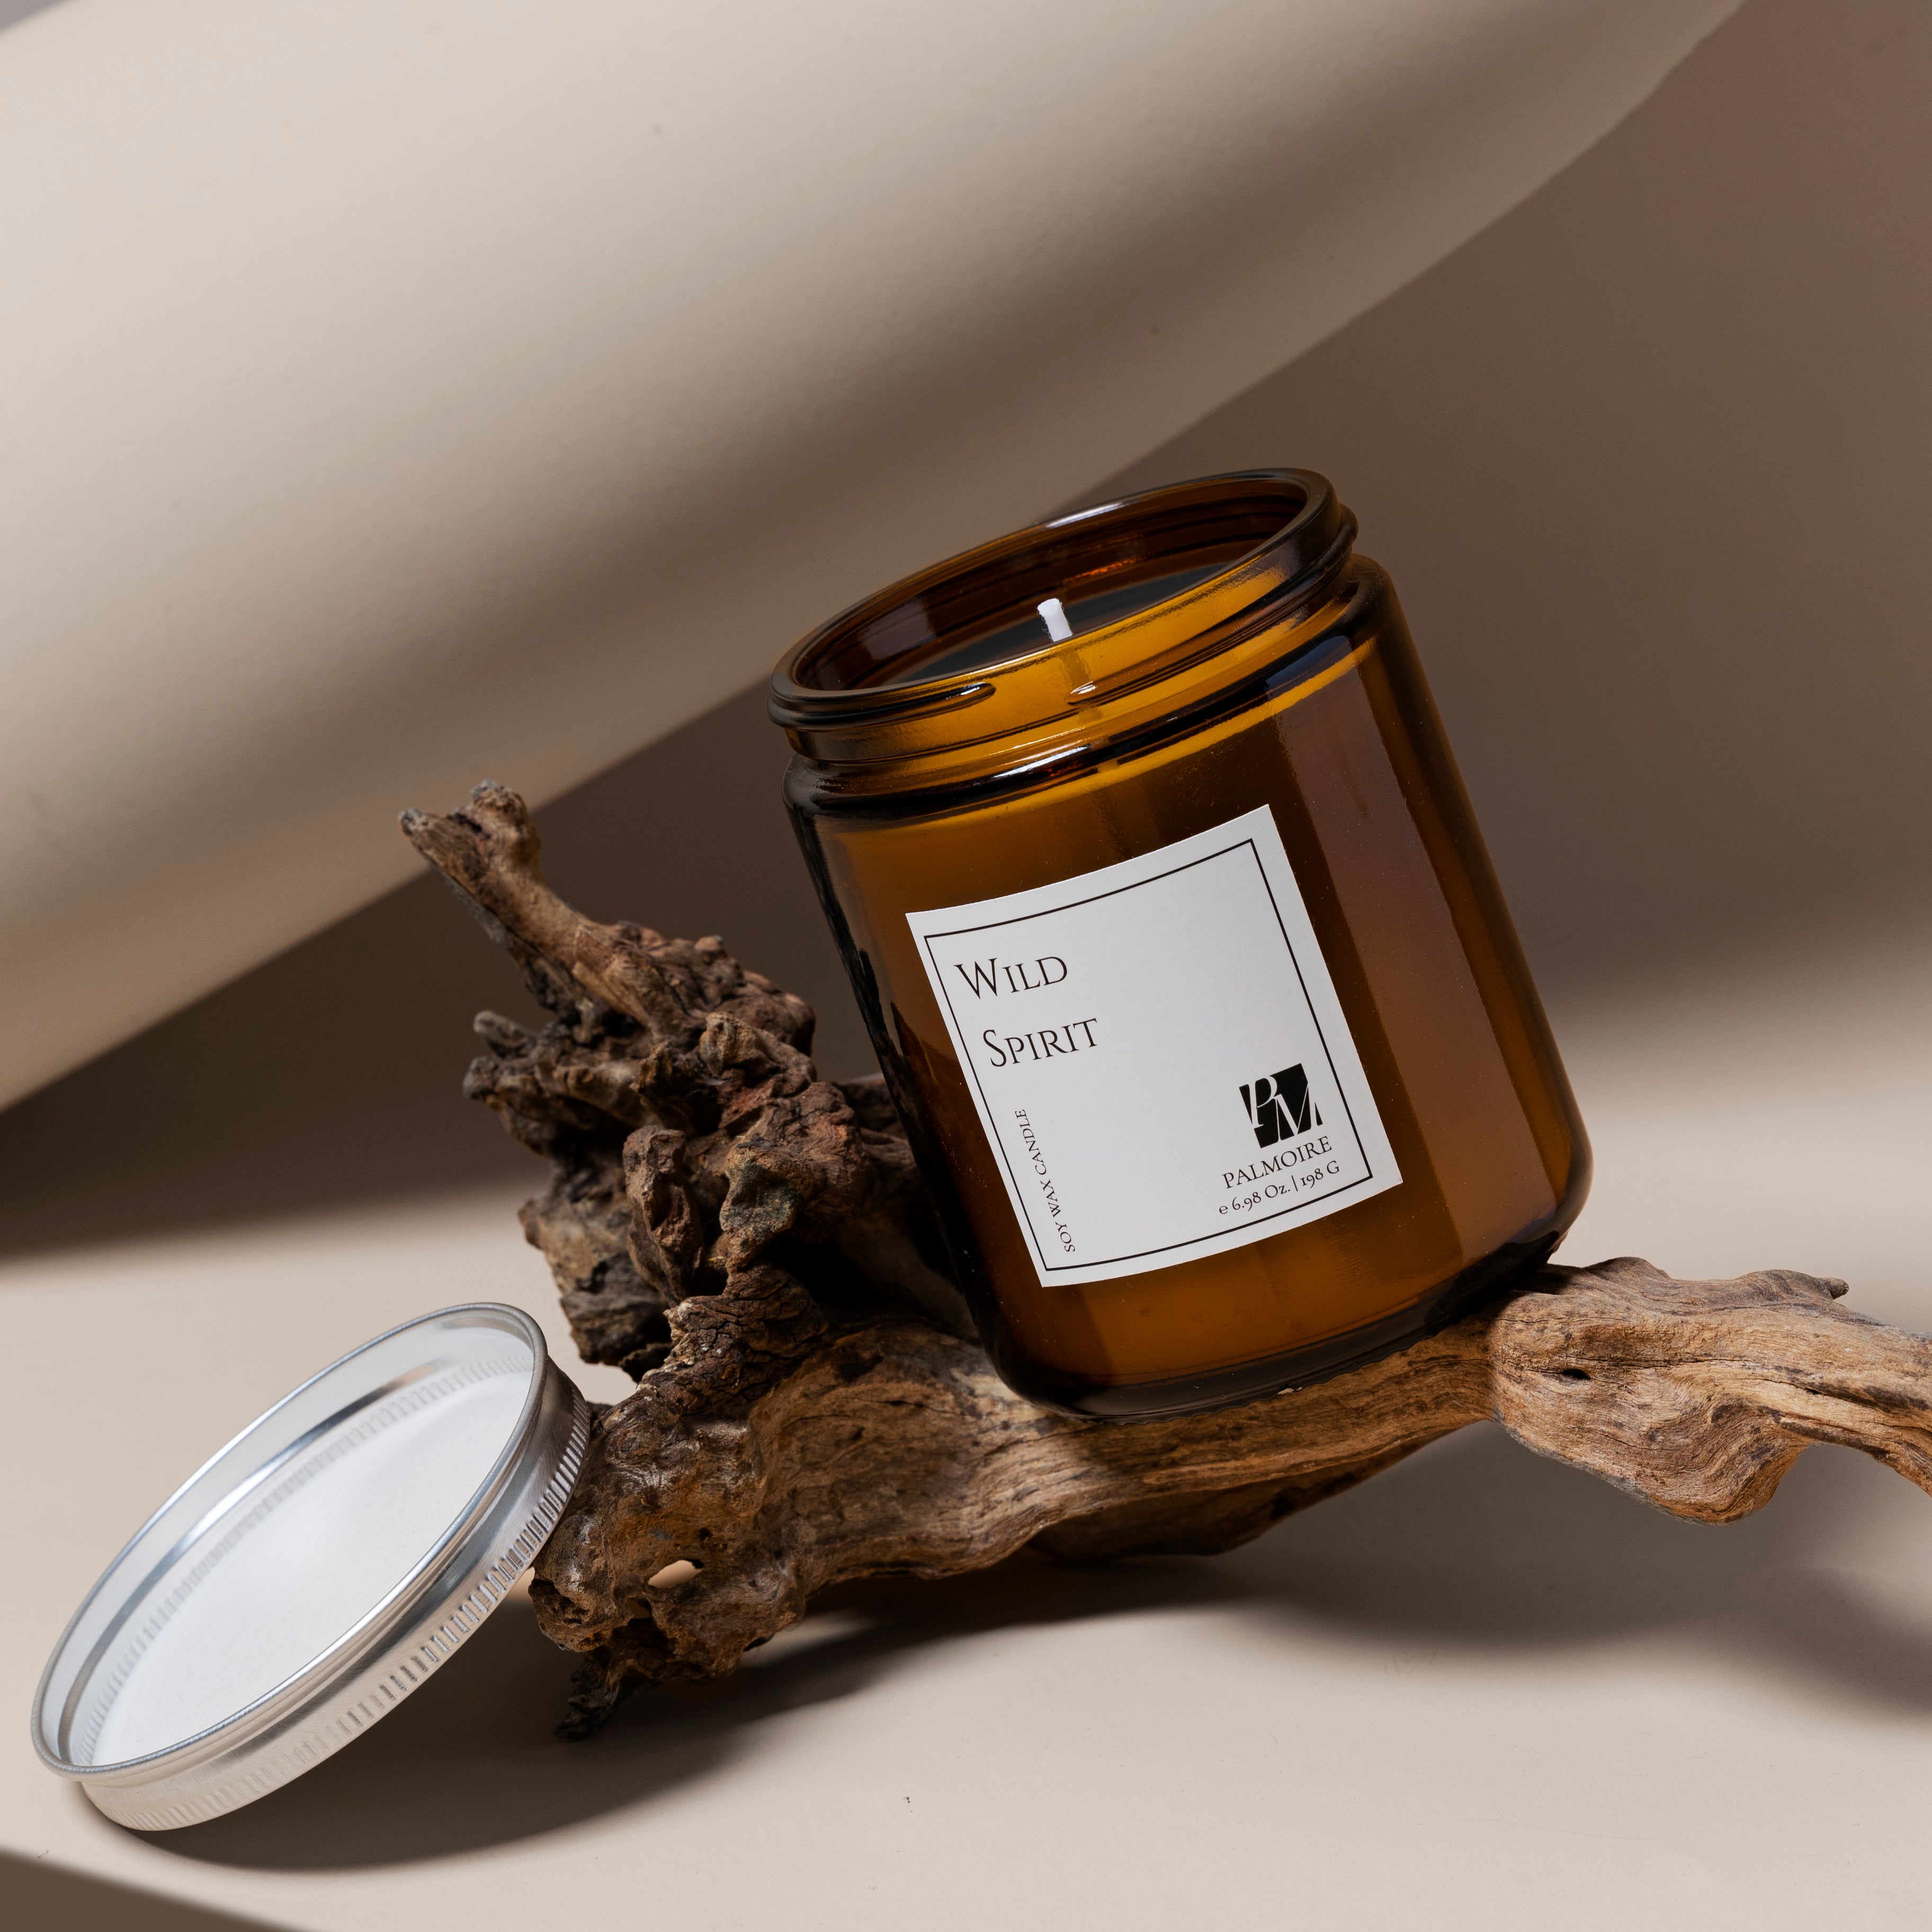 Wild Spirit Soy Wax Candle